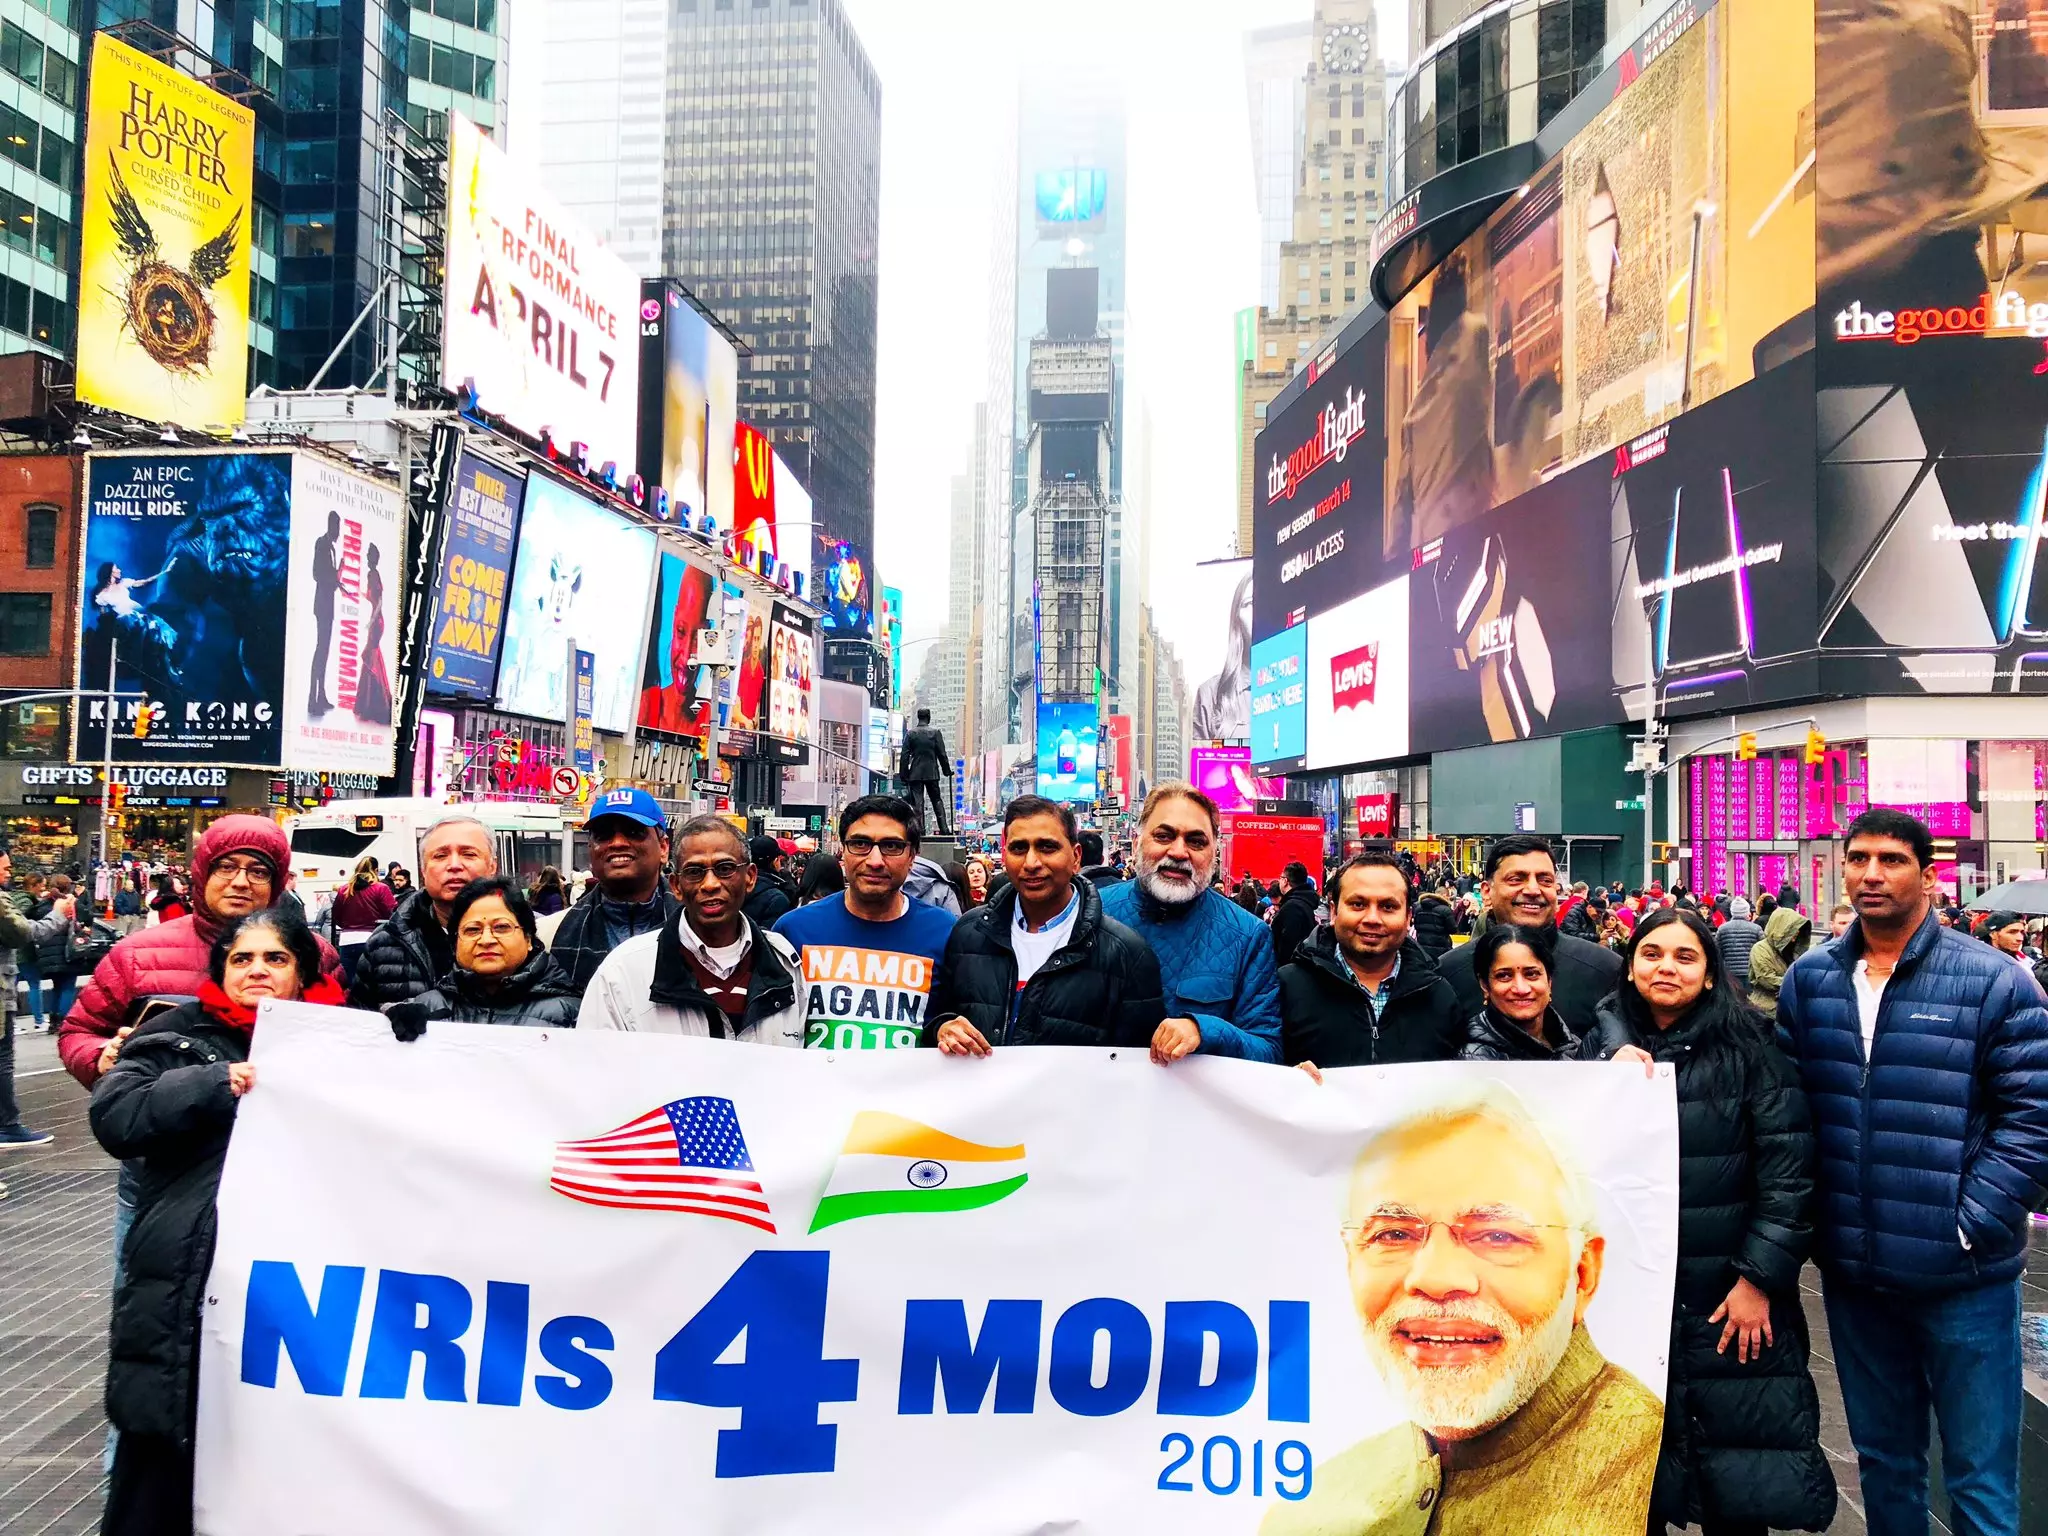 Modi will win, say supporters holding rallies in 16 cities in US